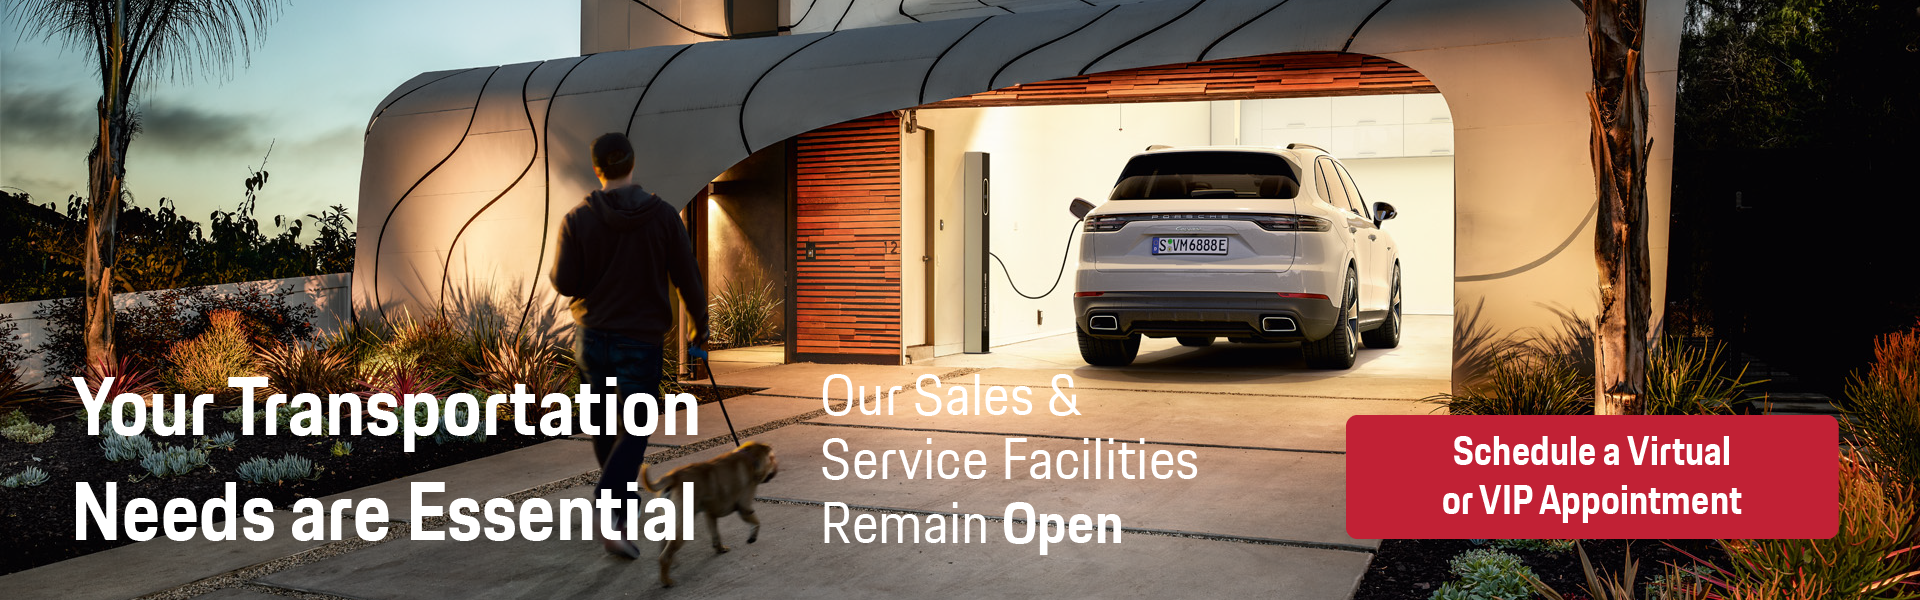 Our Sales & Service Facilities Remain Open